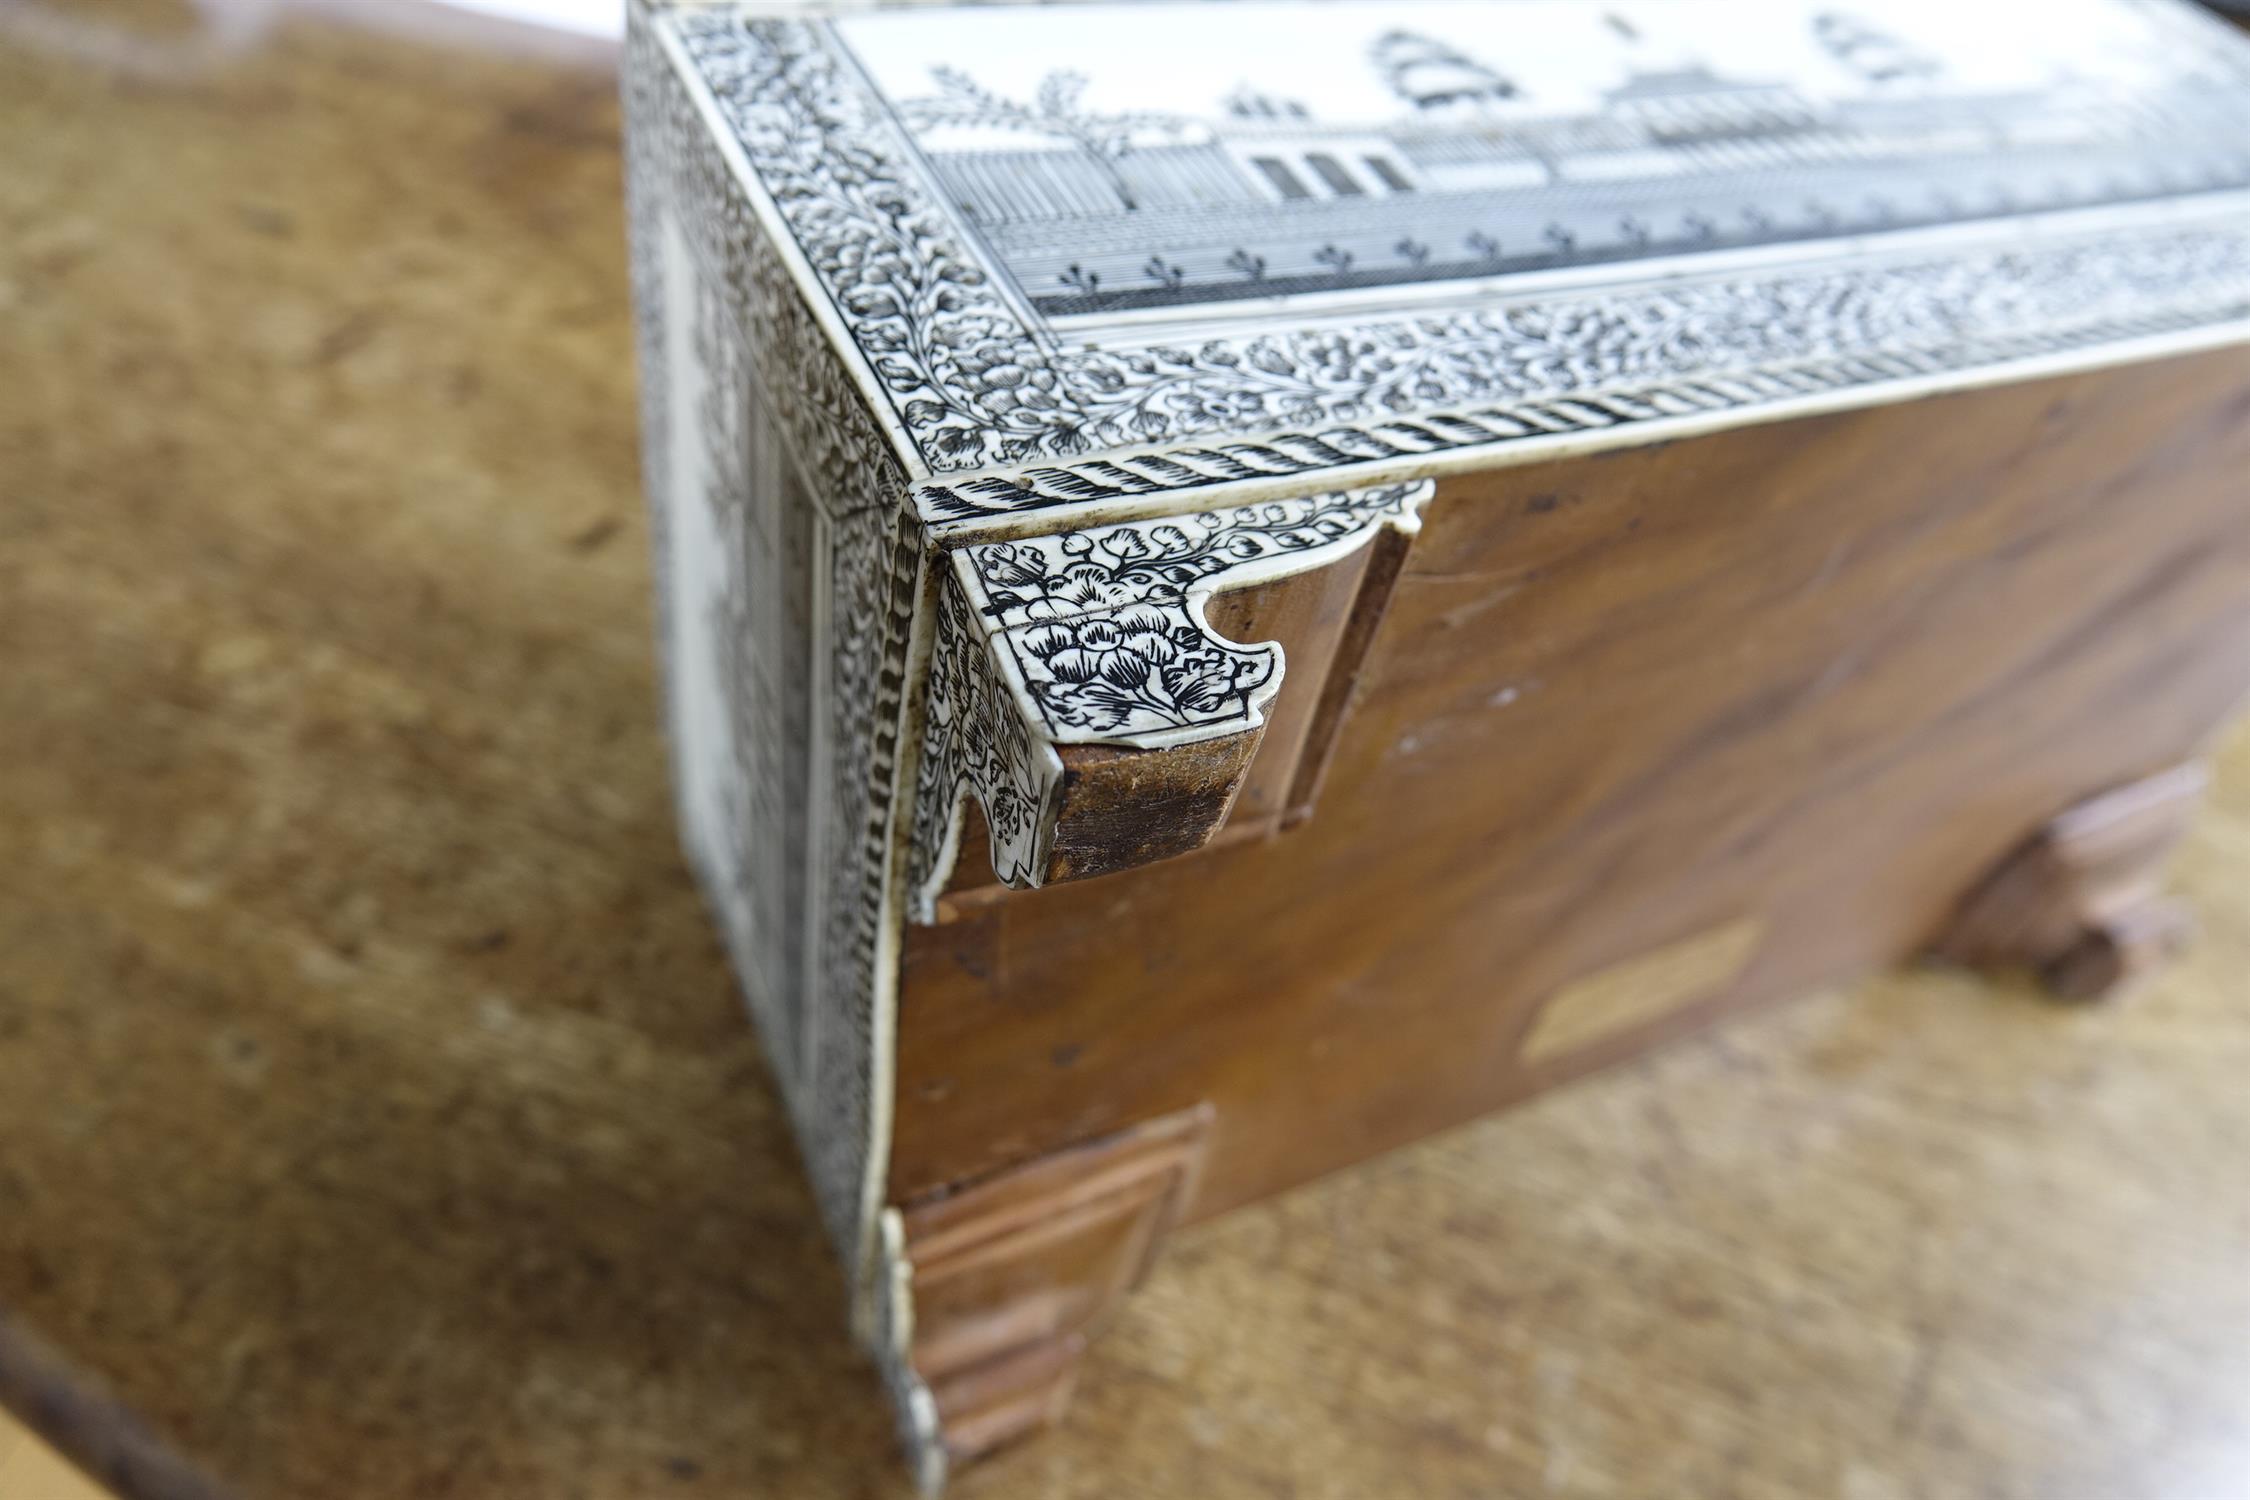 AN ANGLO-INDIAN VIZAGAPATAM TEA CASKET, c.1800, engraved overall in black ink with foliate borders - Image 22 of 22